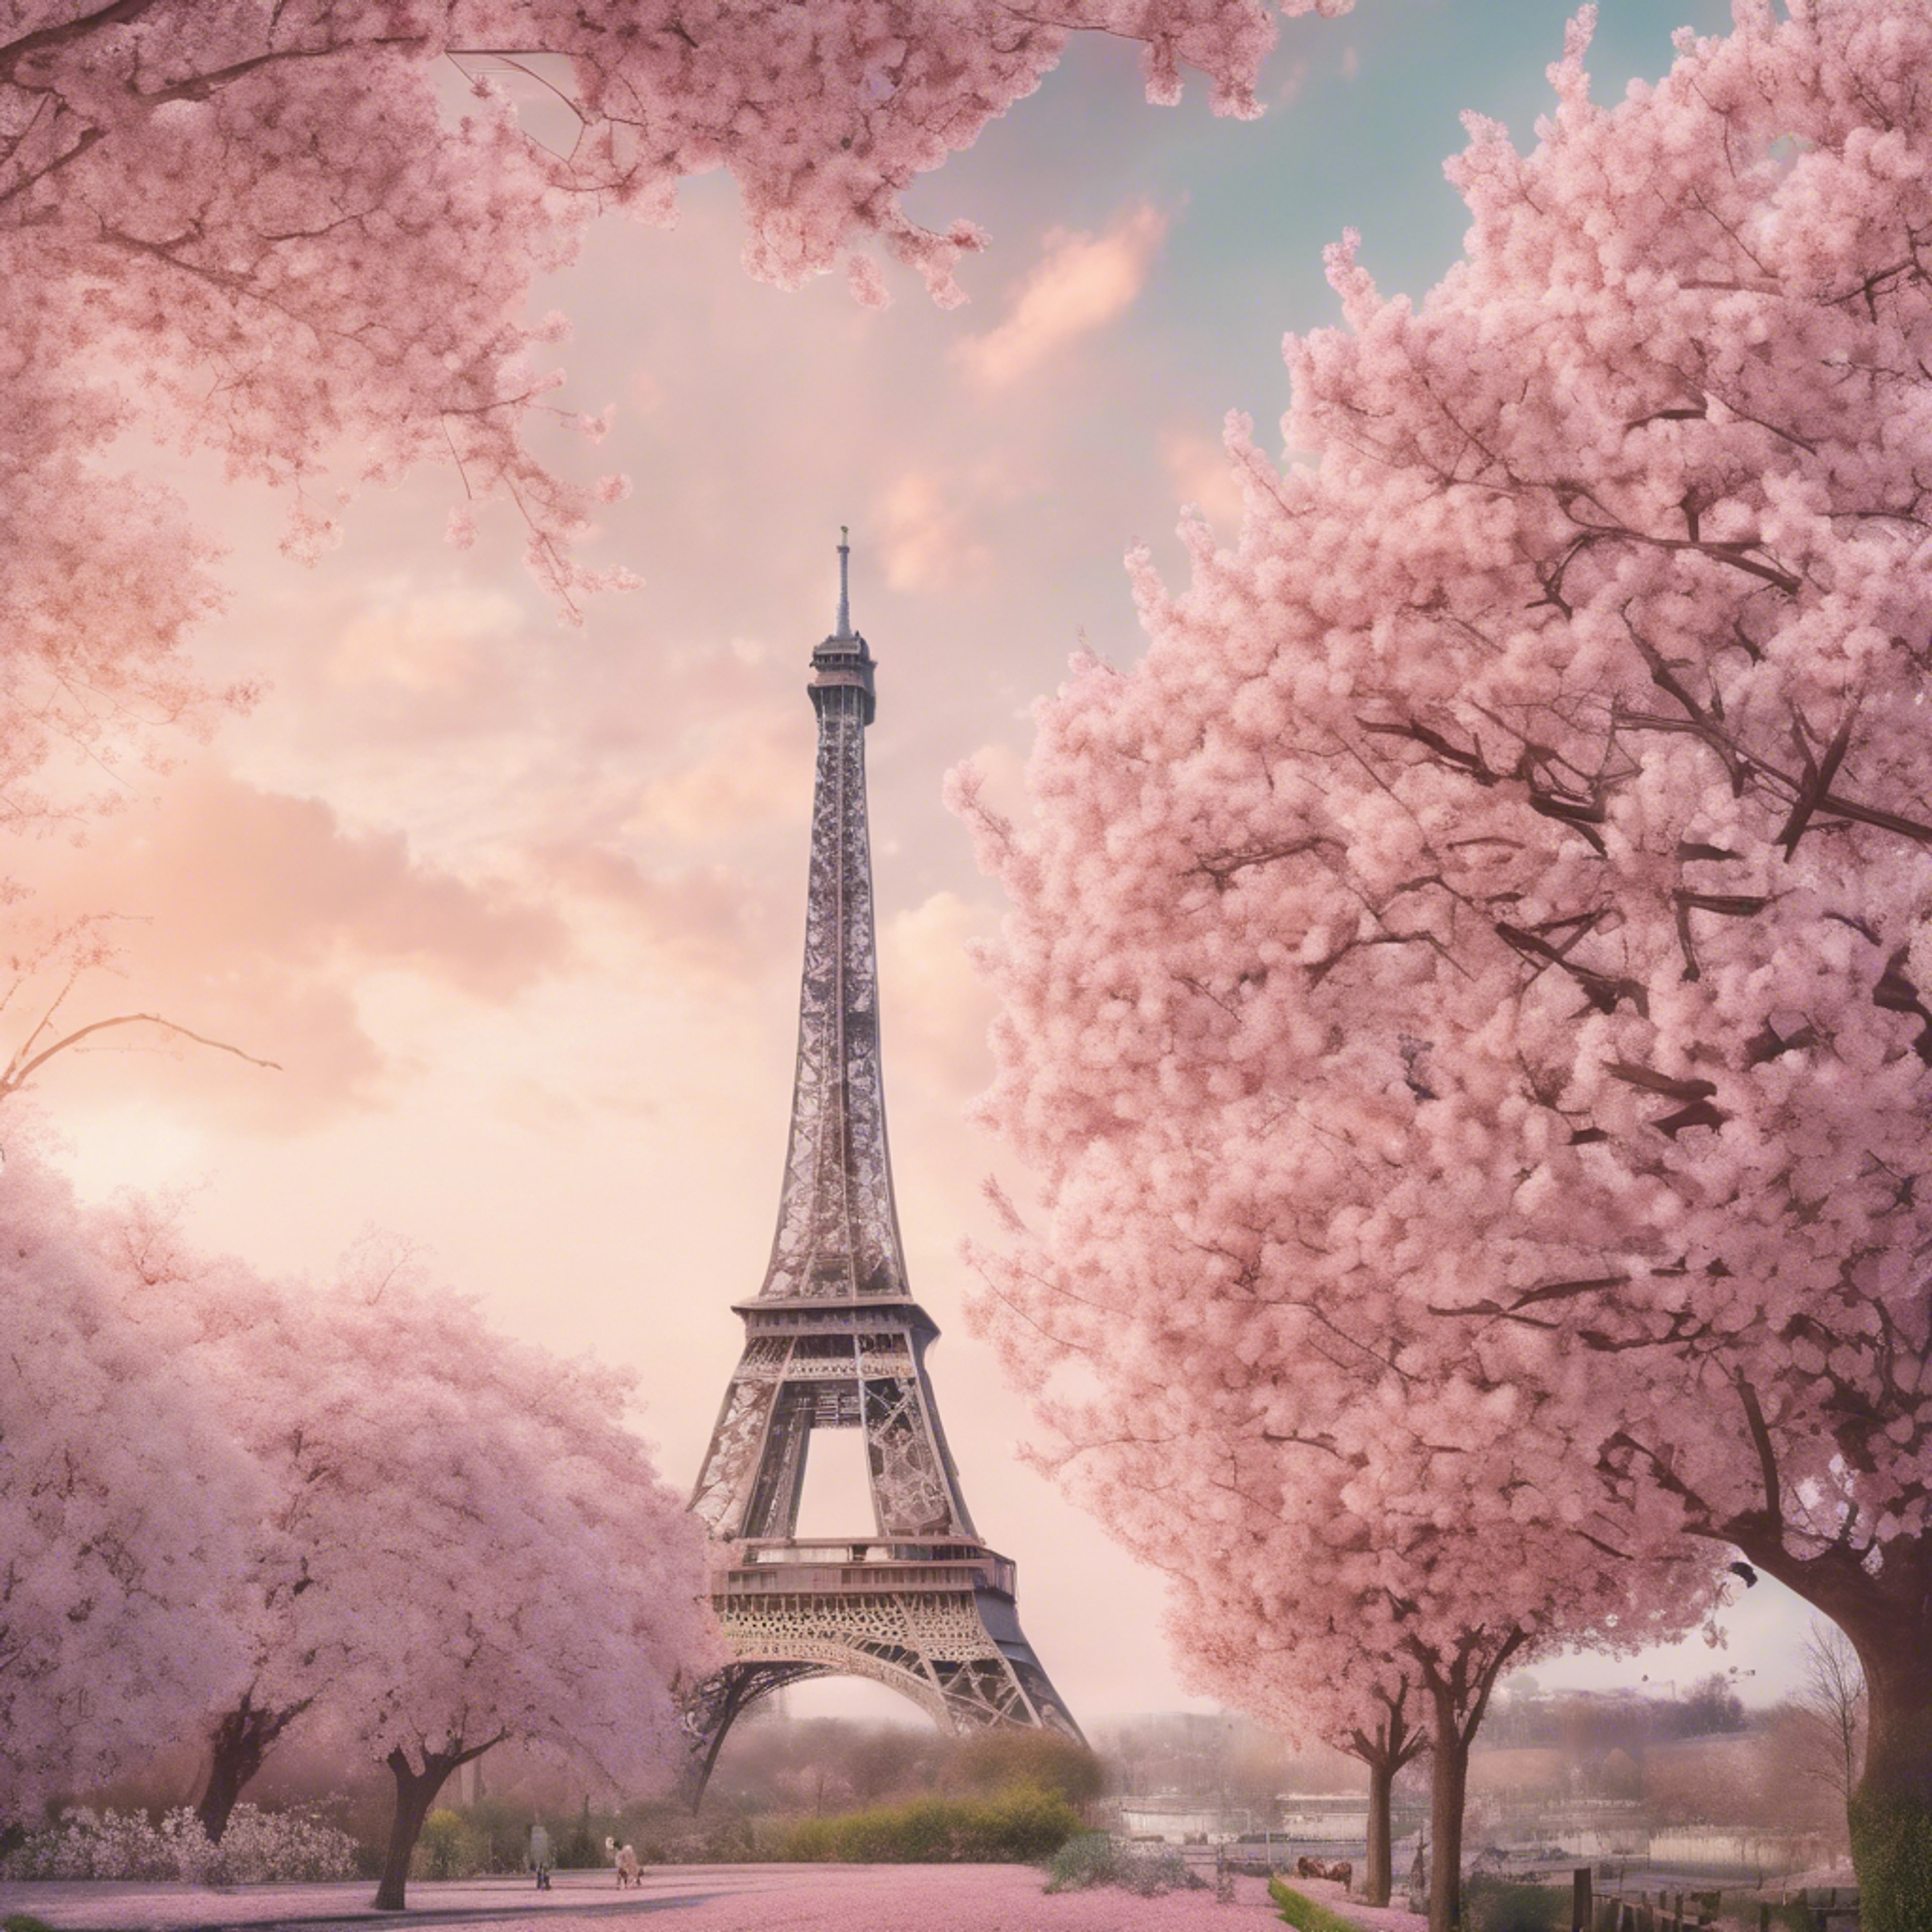 A dreamy pastel artwork of the Eiffel Tower enveloped in cherry blossoms during spring. Behang[34c320f998cf44e290fc]